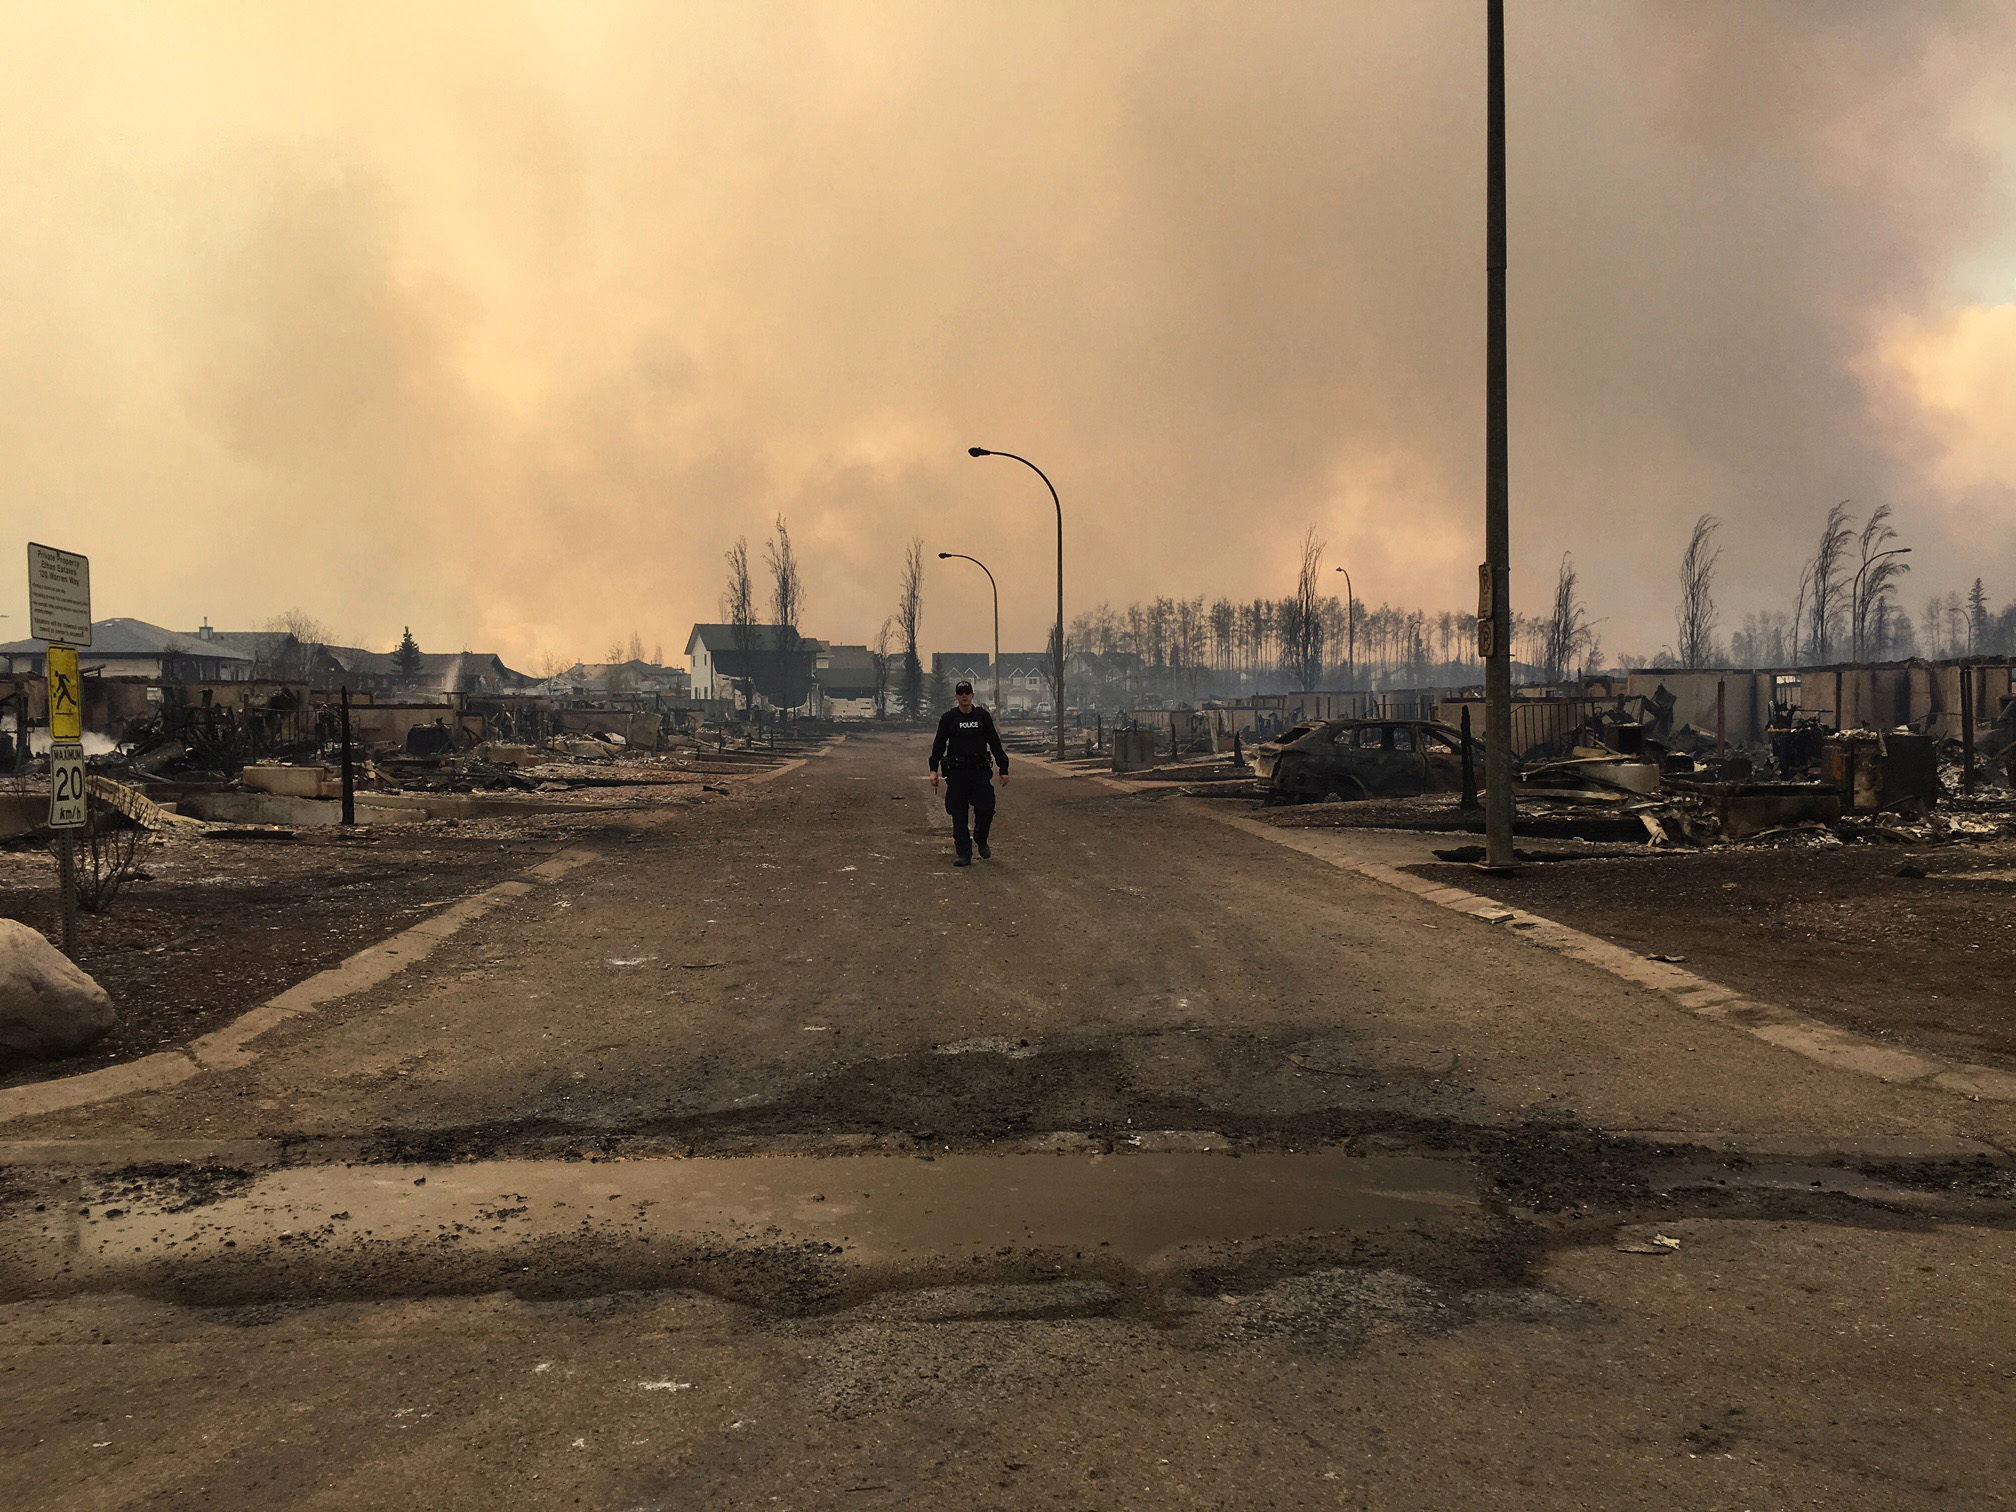 In this image released by the Alberta RCMP on May 5, 2016, a police officer walks on a road past burned down houses in Fort McMurray, Alberta. Canada prepared to airlift to safety up to 25,000 people who were forced from their homes by raging forest fires in Alberta's oil sands region, and now risk getting trapped north of Fort McMurray. / AFP PHOTO / Alberta RCMP / RCMP / RESTRICTED TO EDITORIAL USE - MANDATORY CREDIT "AFP PHOTO / ALBERTA RCMP/ HO" - NO MARKETING NO ADVERTISING CAMPAIGNS - DISTRIBUTED AS A SERVICE TO CLIENTS